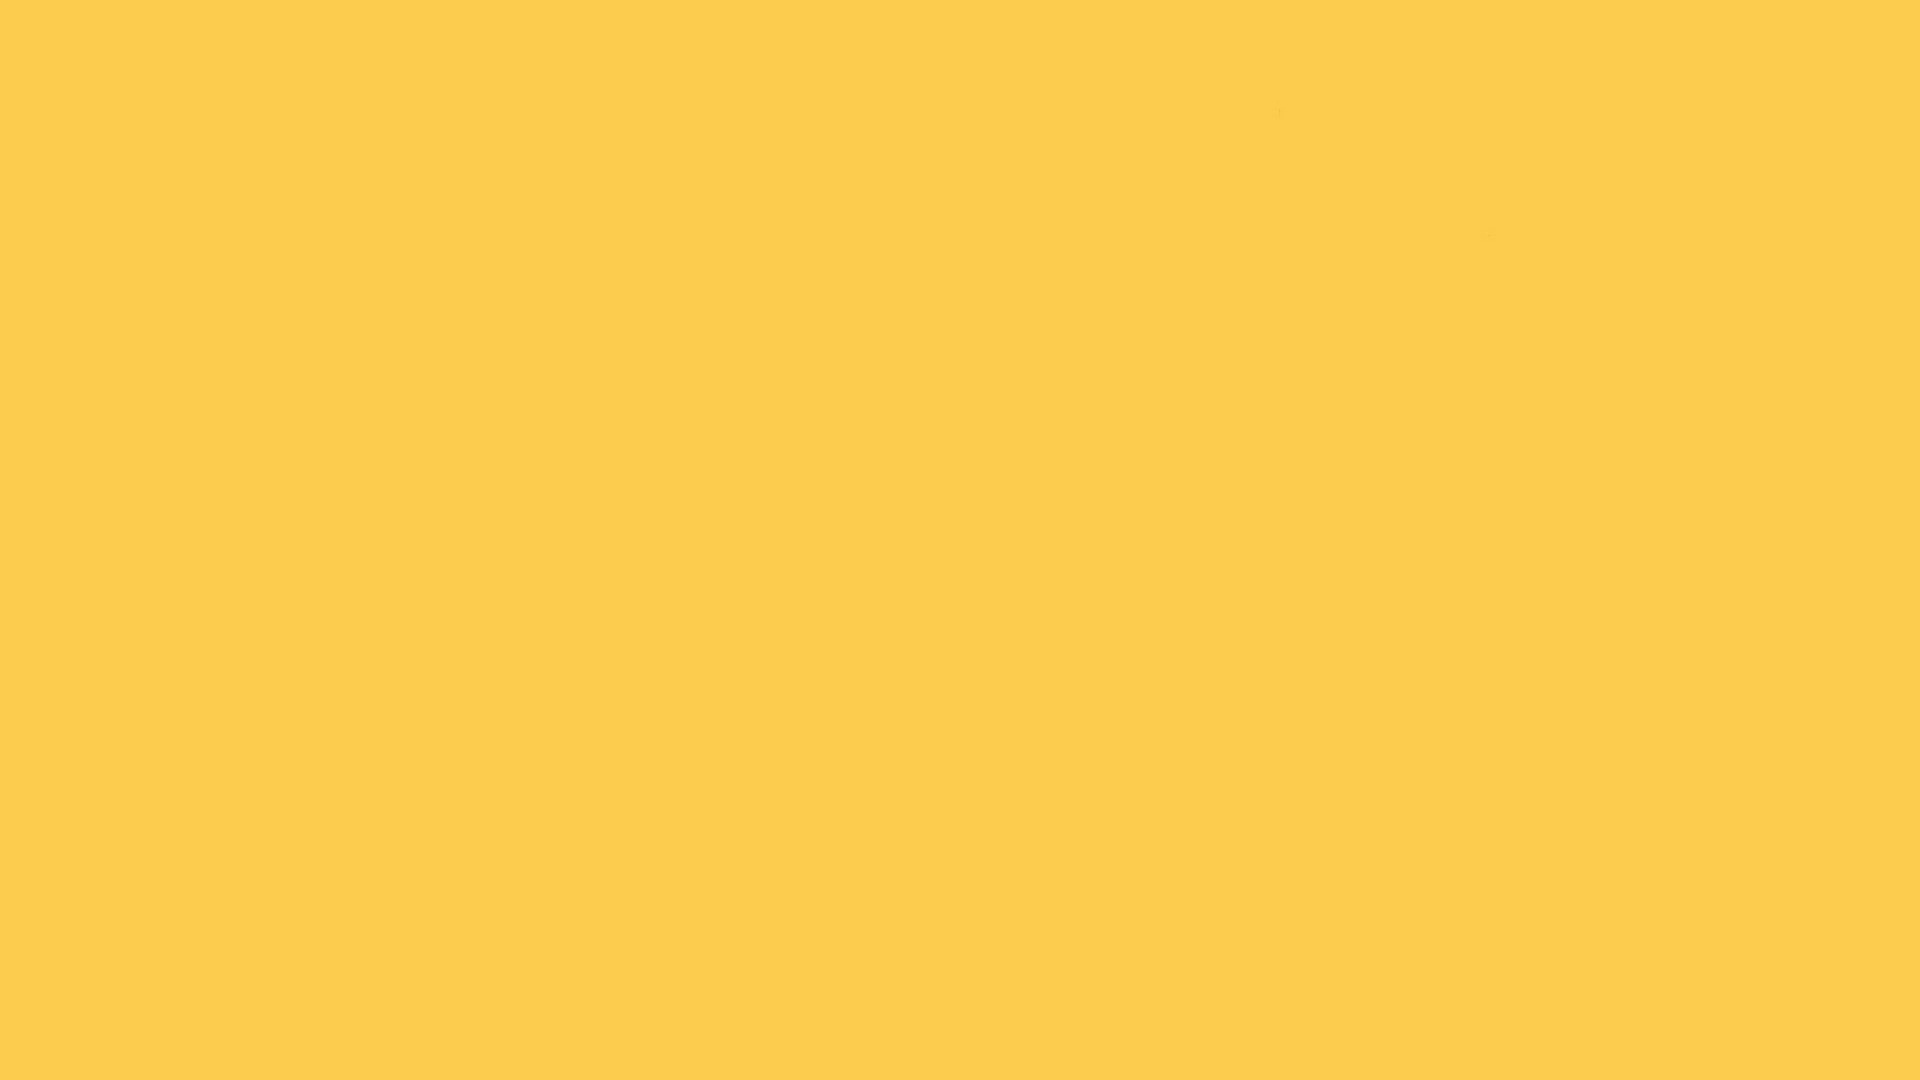 HD Plain Yellow Backgrounds with image resolution 1920x1080 pixel. You can use this wallpaper as background for your desktop Computer Screensavers, Android or iPhone smartphones